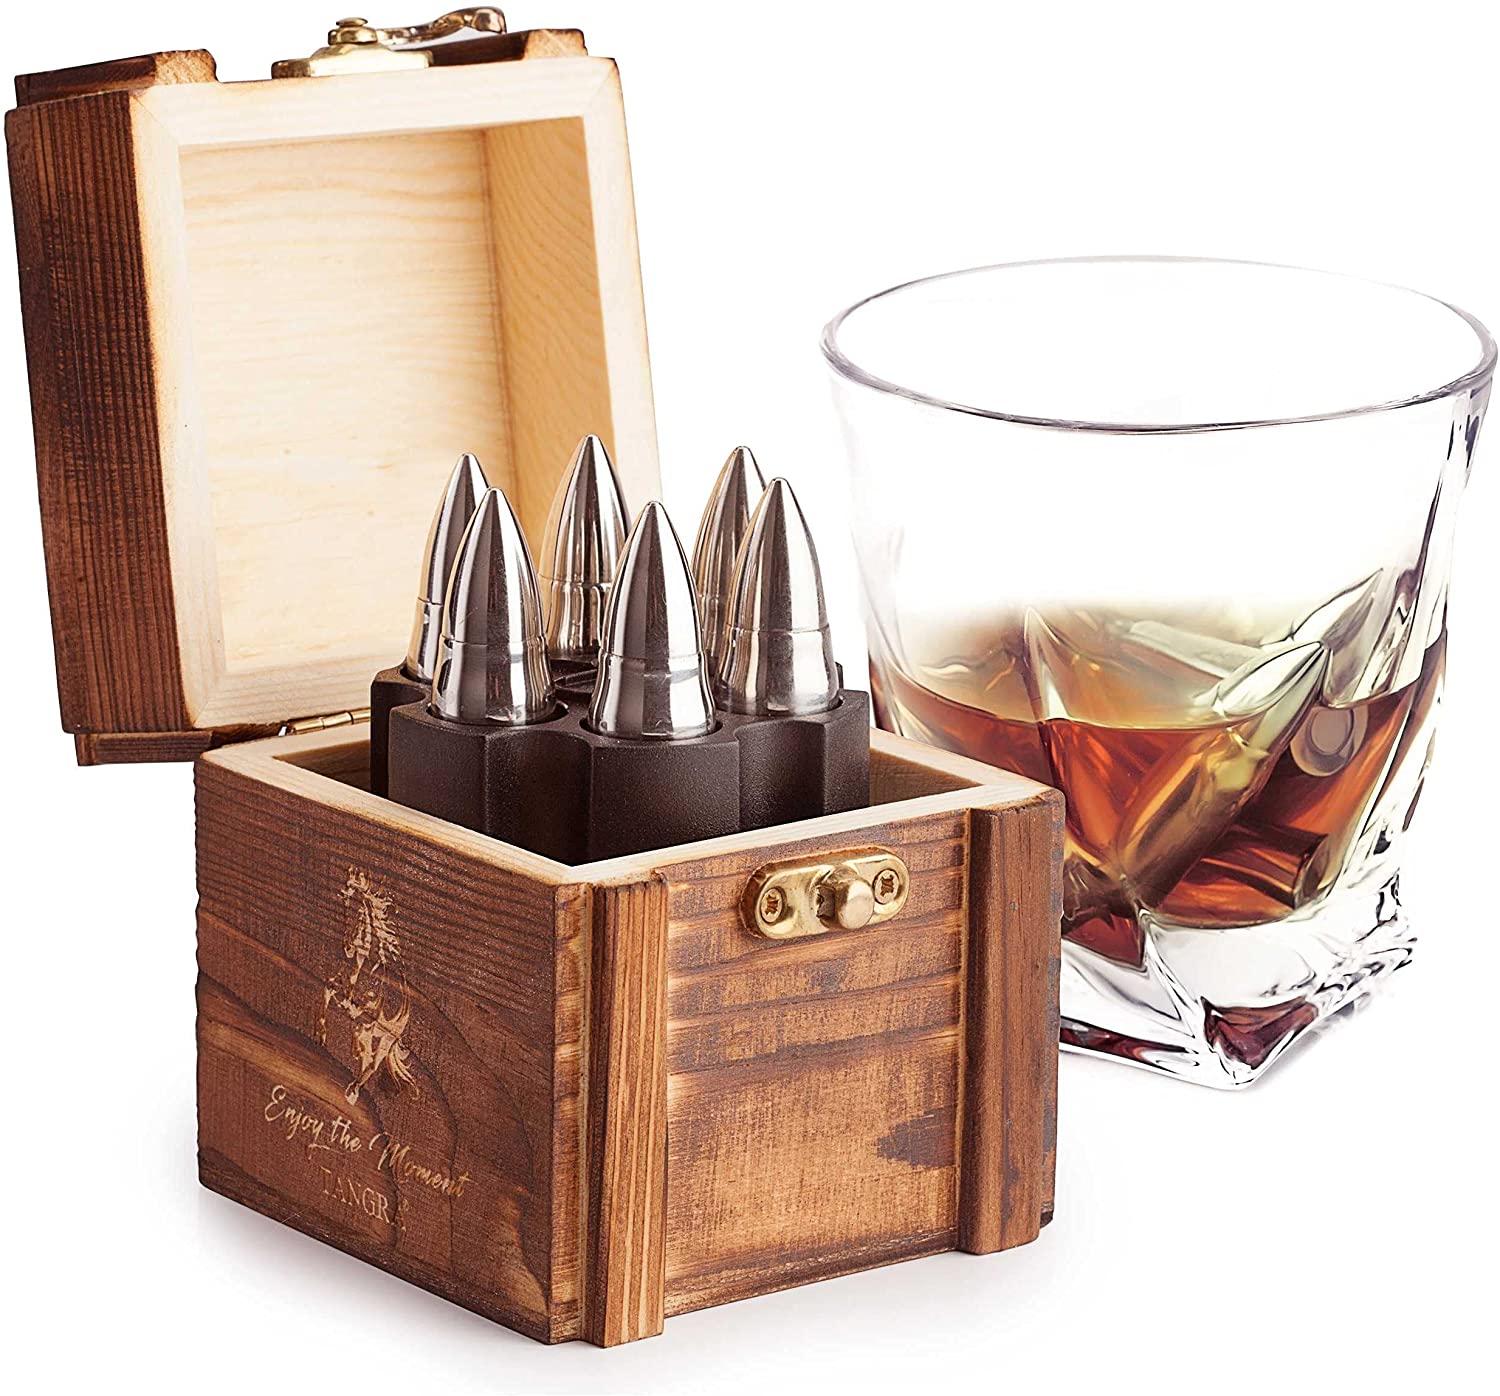 Stainless Steel Whisky Stones Bullets Reusable Chilling Stone Ice Cubes ing kothak kayu Featured Image